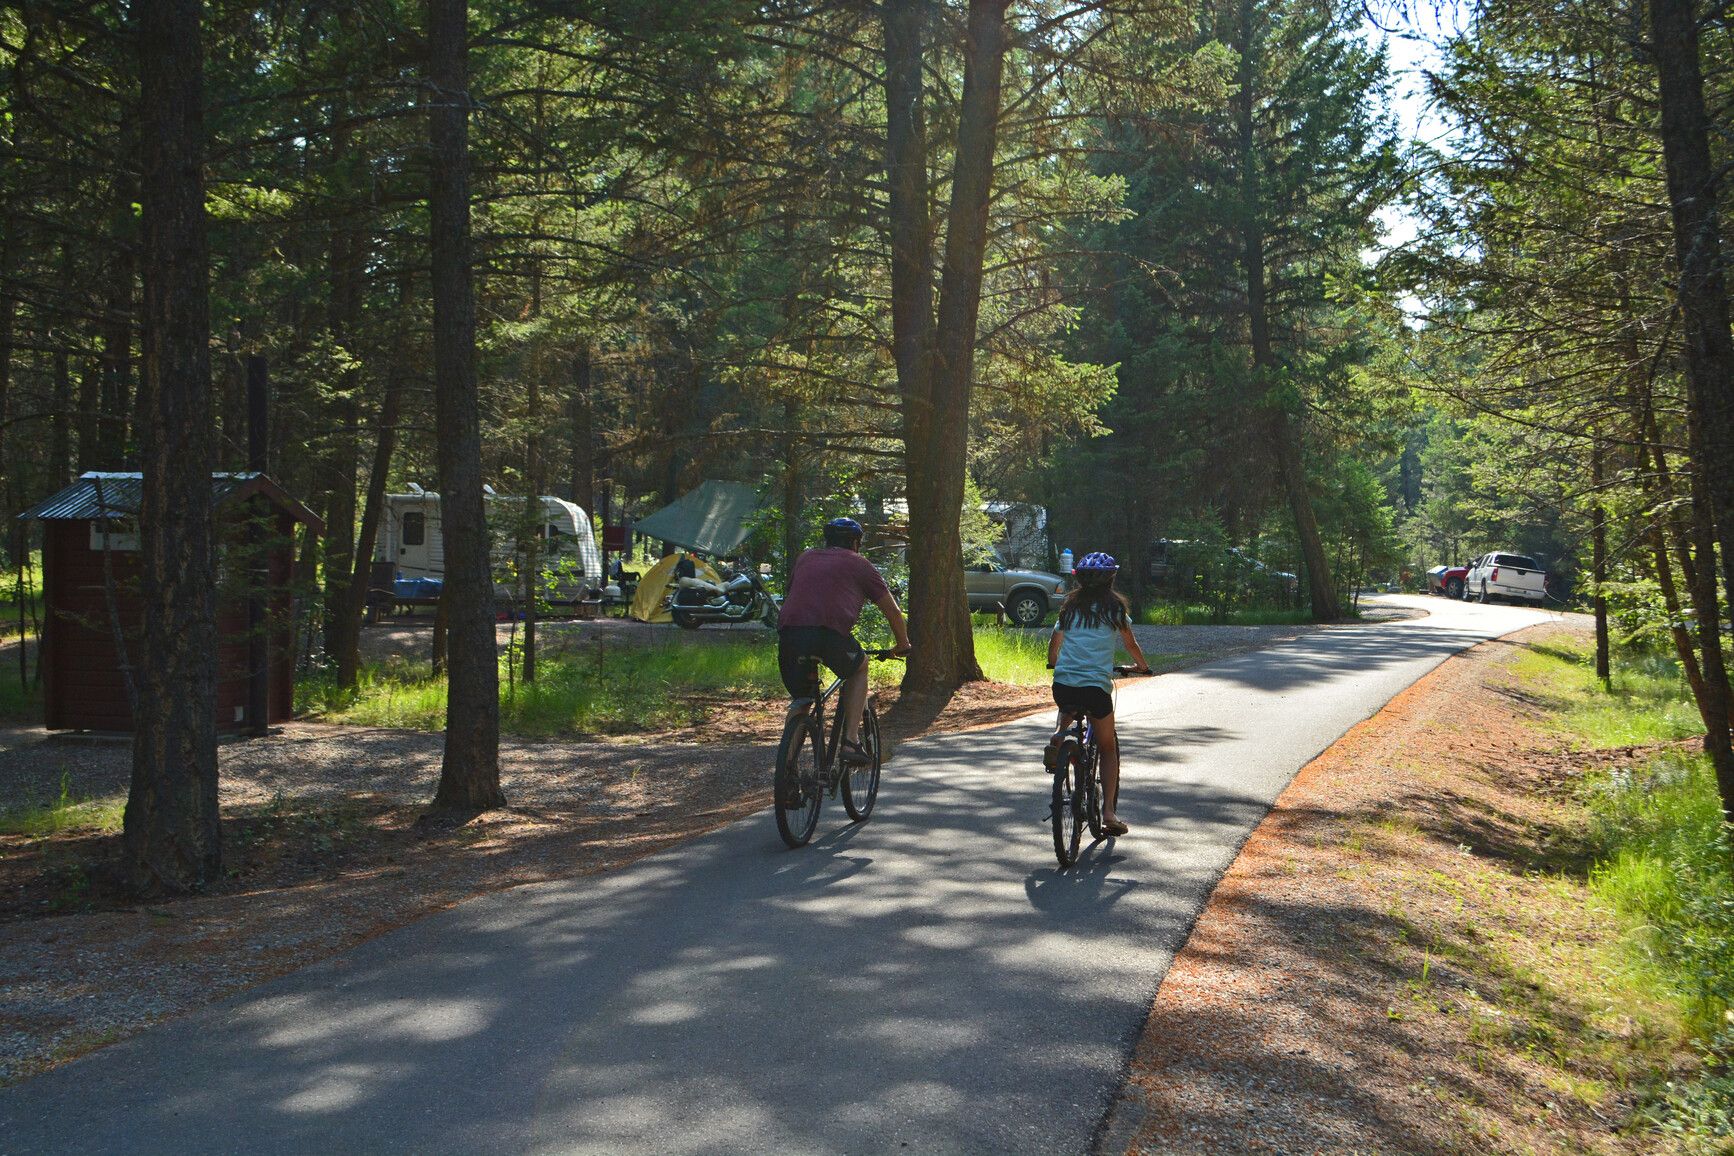 Discover the tranquility of Kikomun Creek Park's forested campground, where visitors can leisurely ride bikes along the paved road.